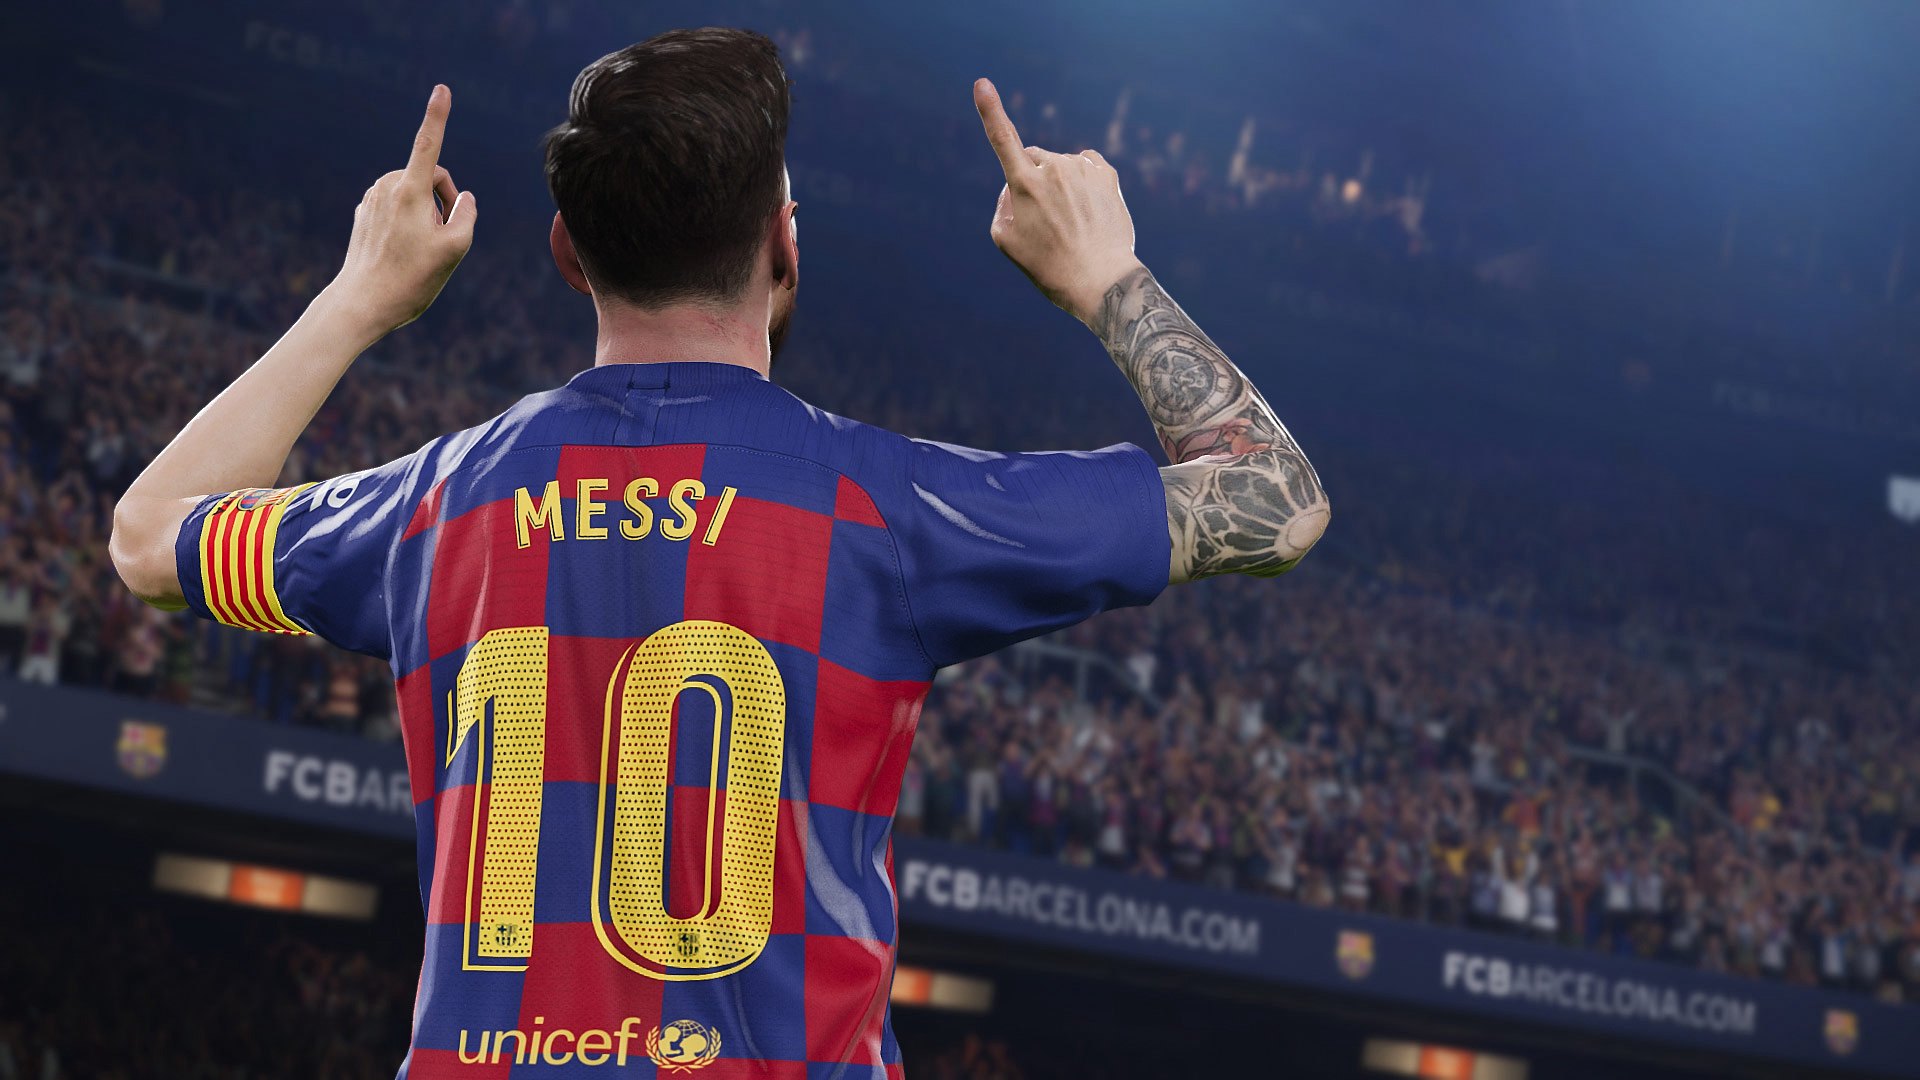 eFootball PES 2020 PlayStation 4 Account pixelpuffin.net Activation Link 13.55$